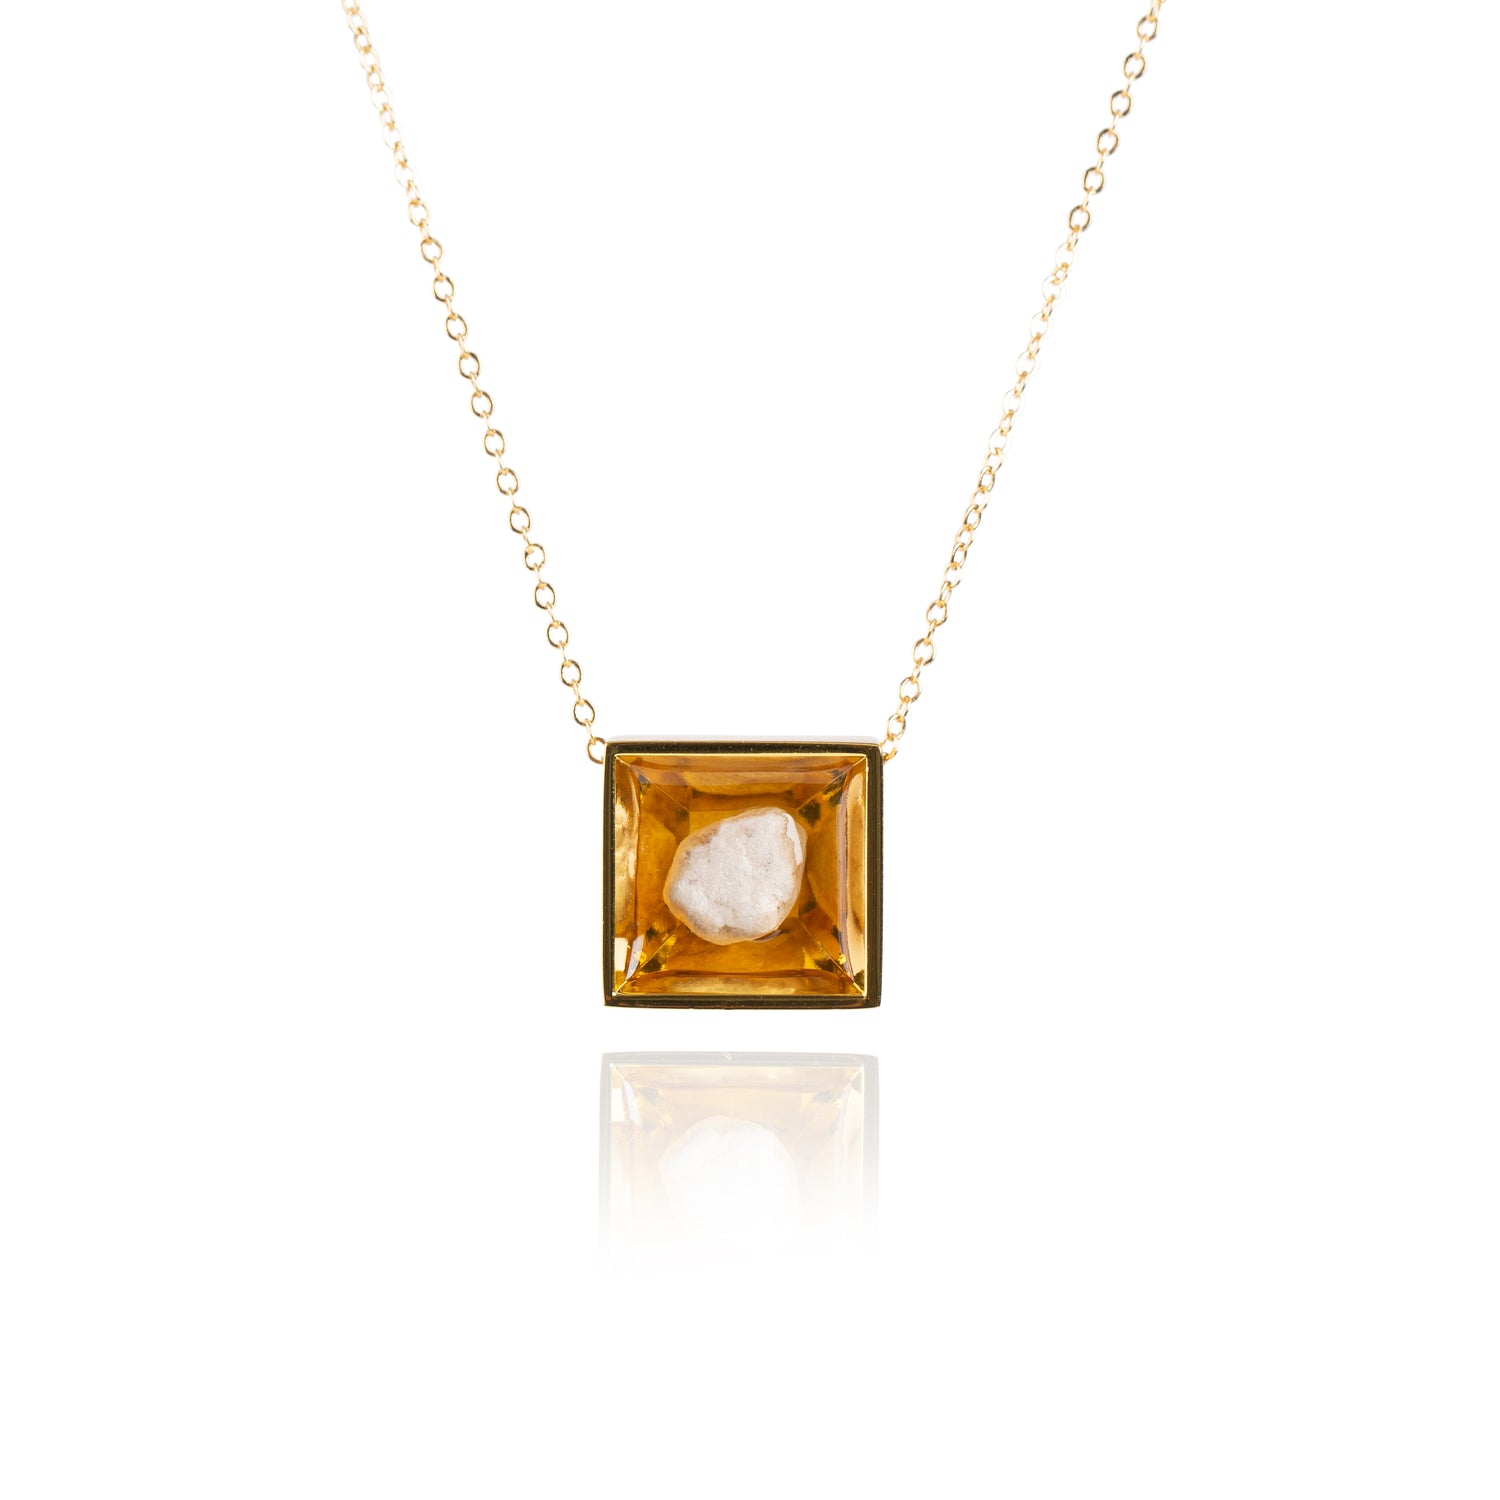 A small natural tan stone sitting in the middle of a square shaped metal pendant in a gold color. The pendant is hanging on a gold chain.